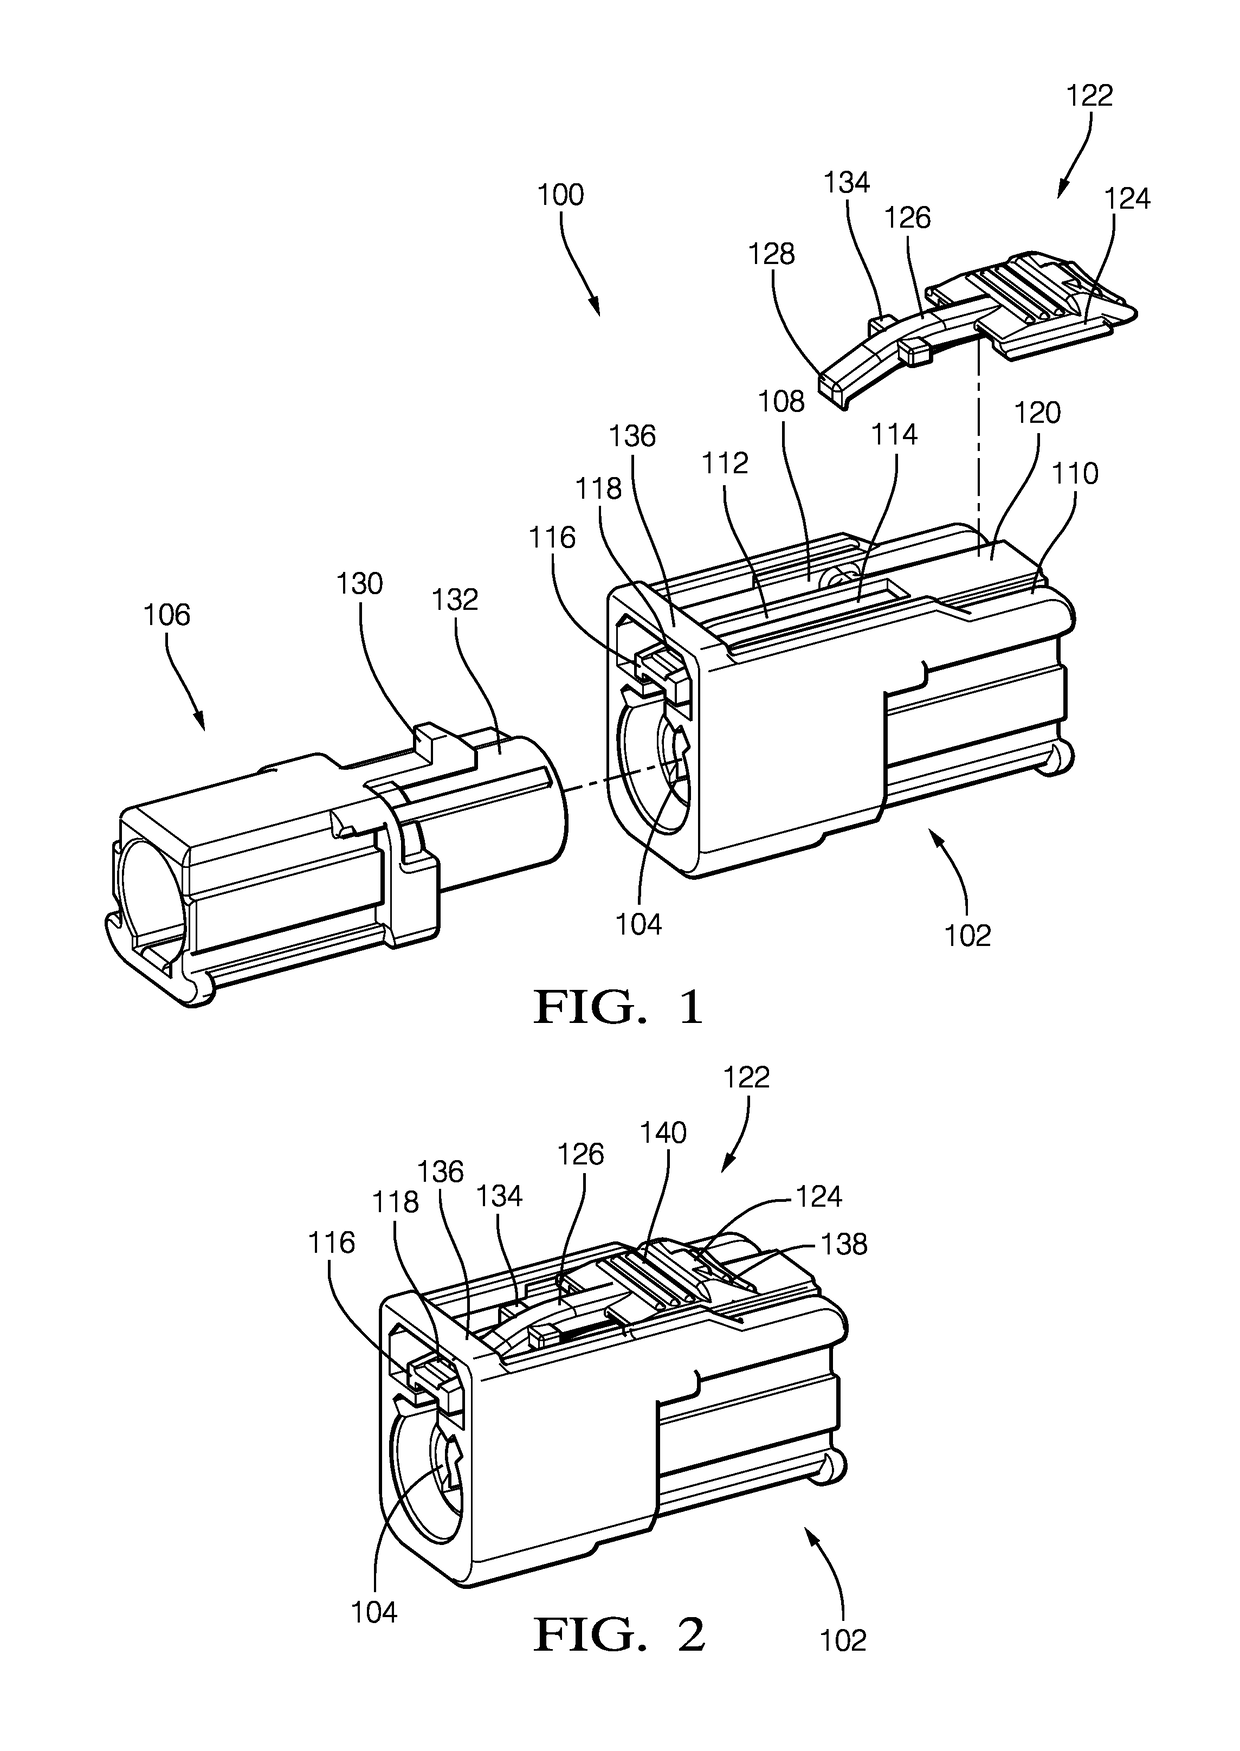 Connector system with low profile connector position assurance device